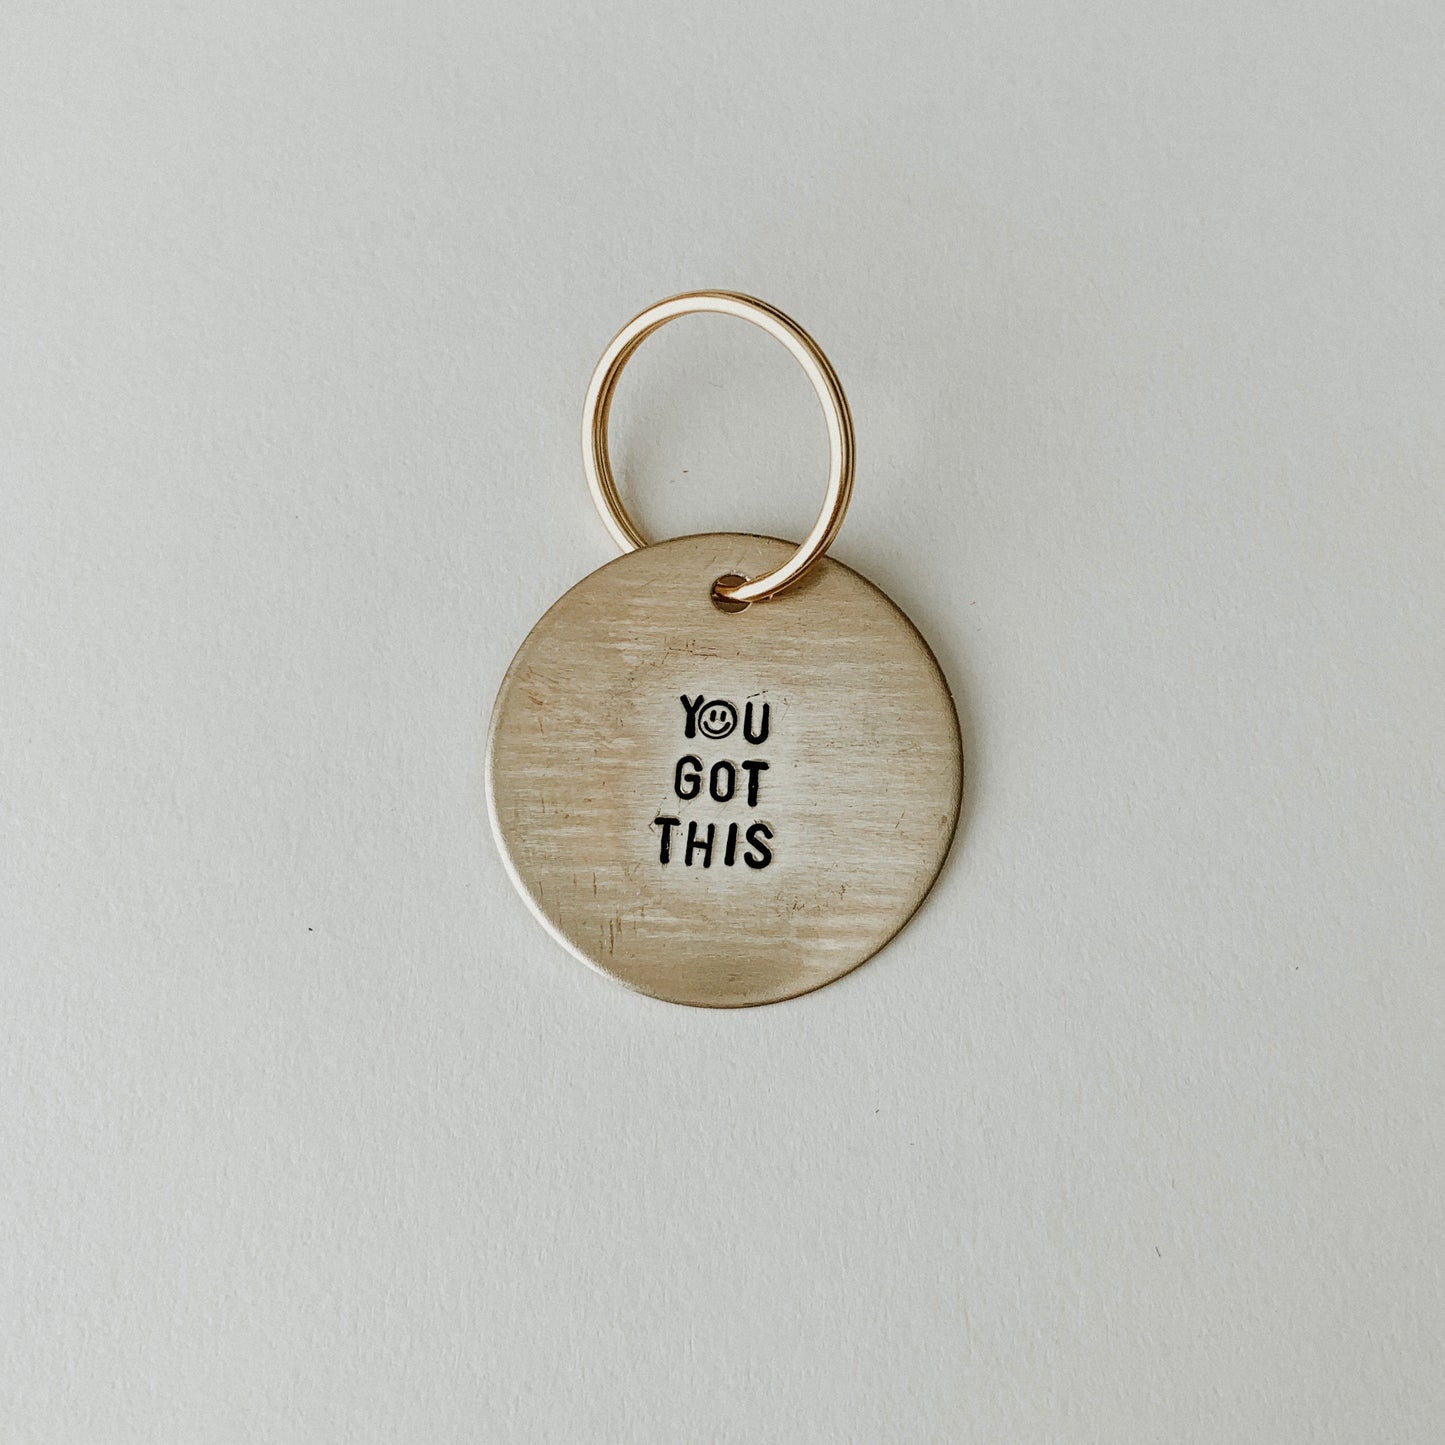 You Got This :) / Large Brass Key Tag